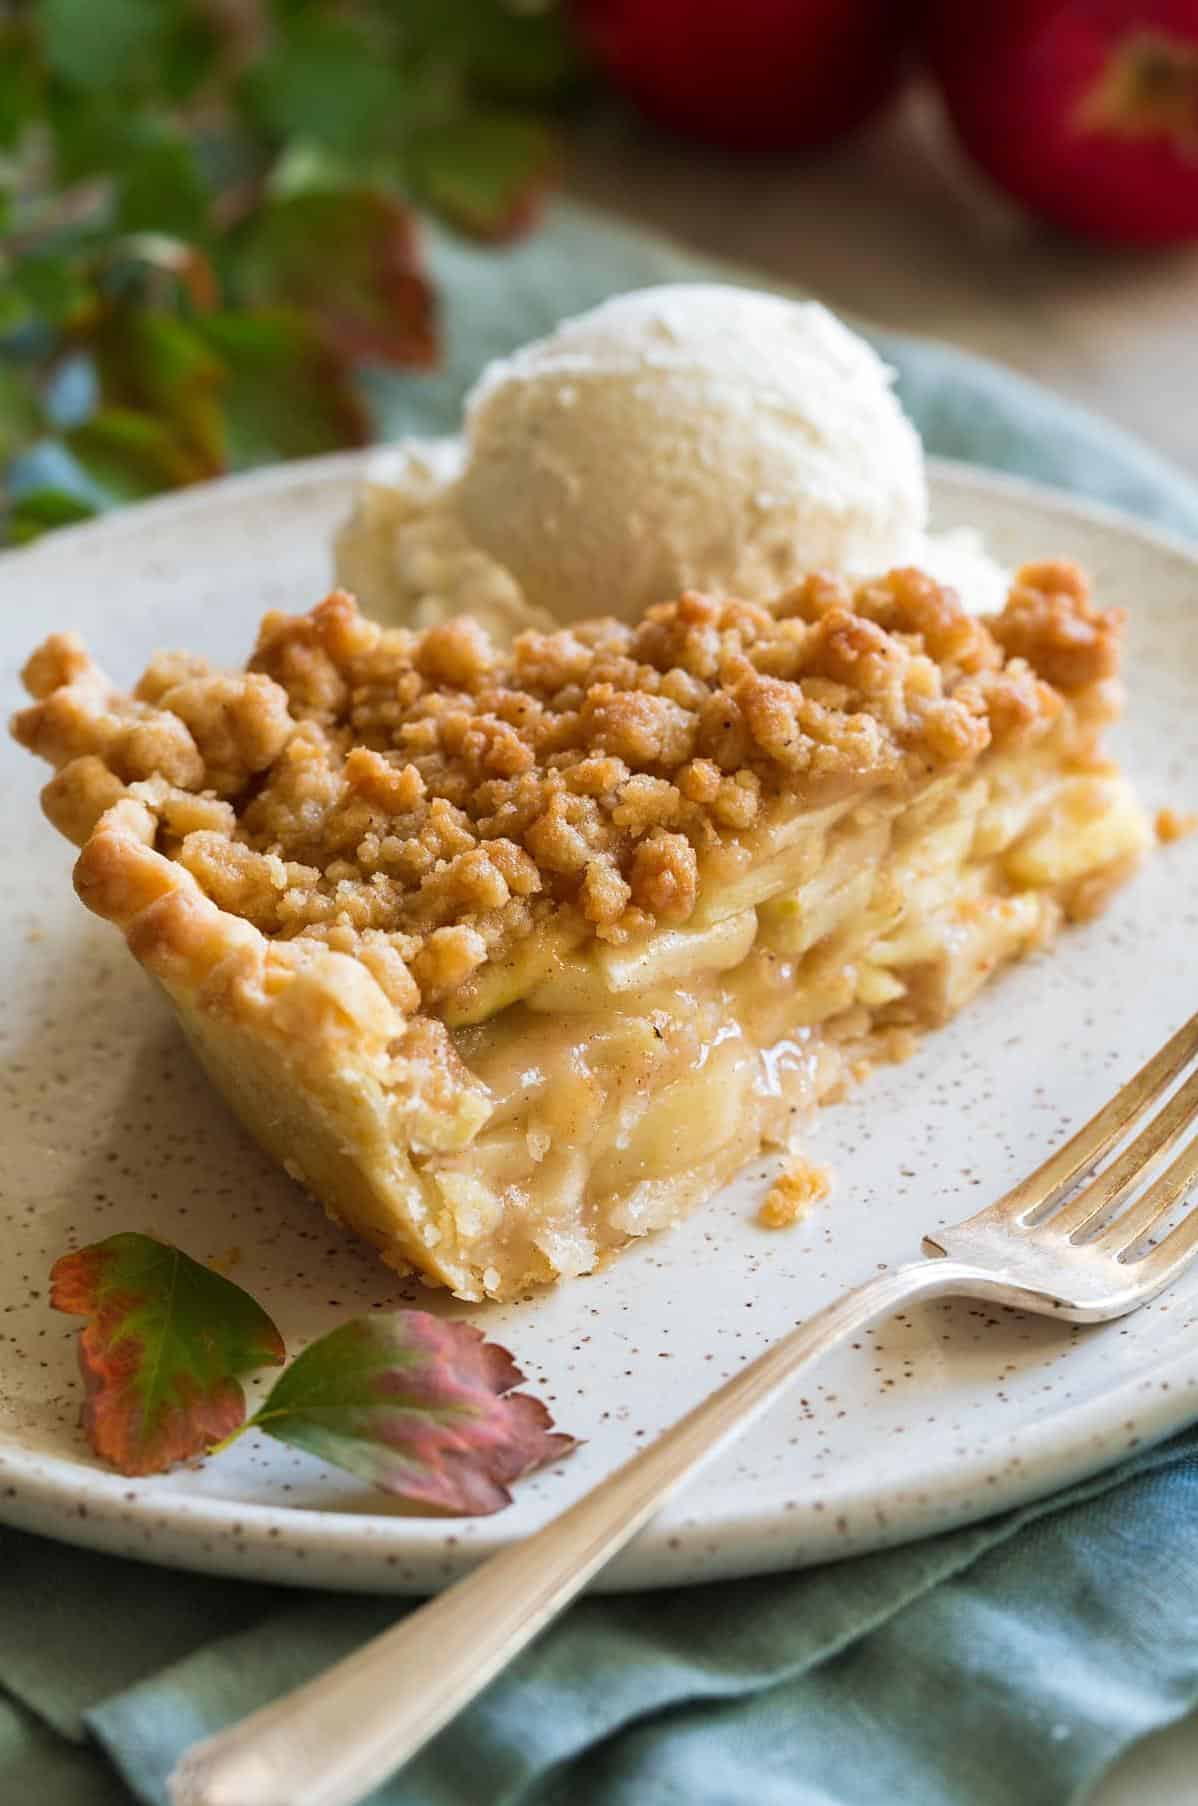 Indulge in This Delicious Dutch Apple Pie Recipe Today!